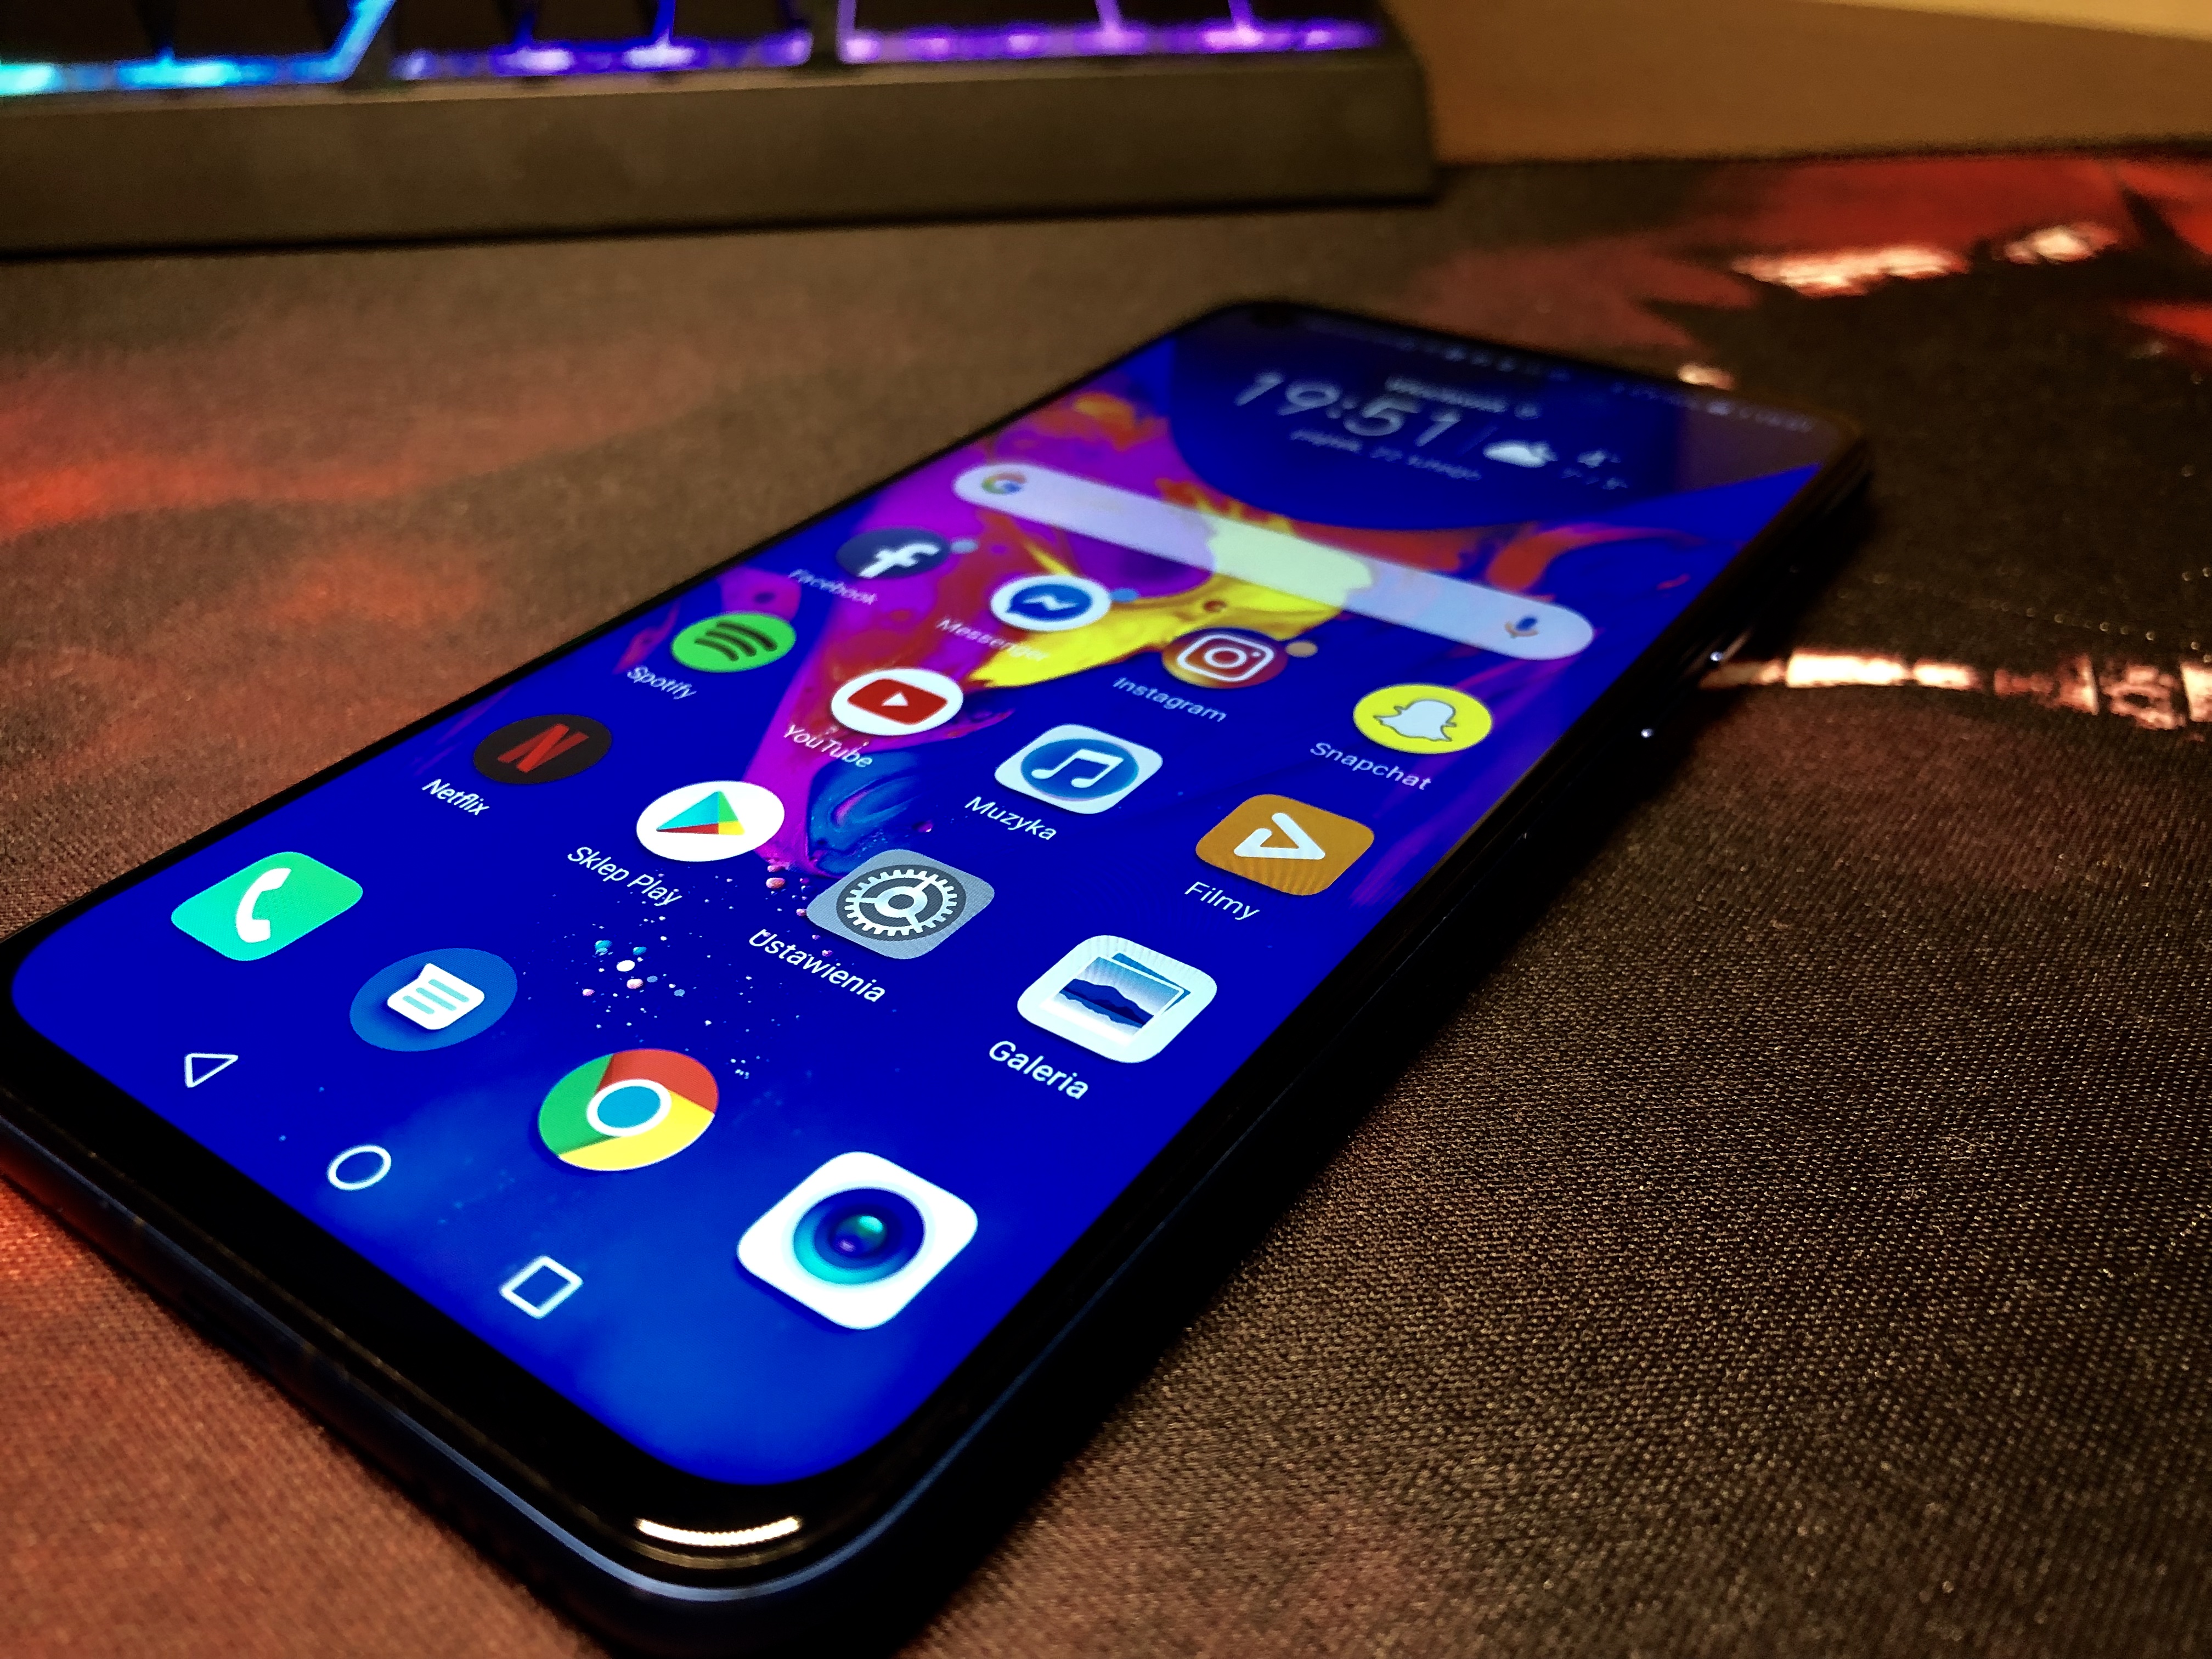 Honor View 20 - front